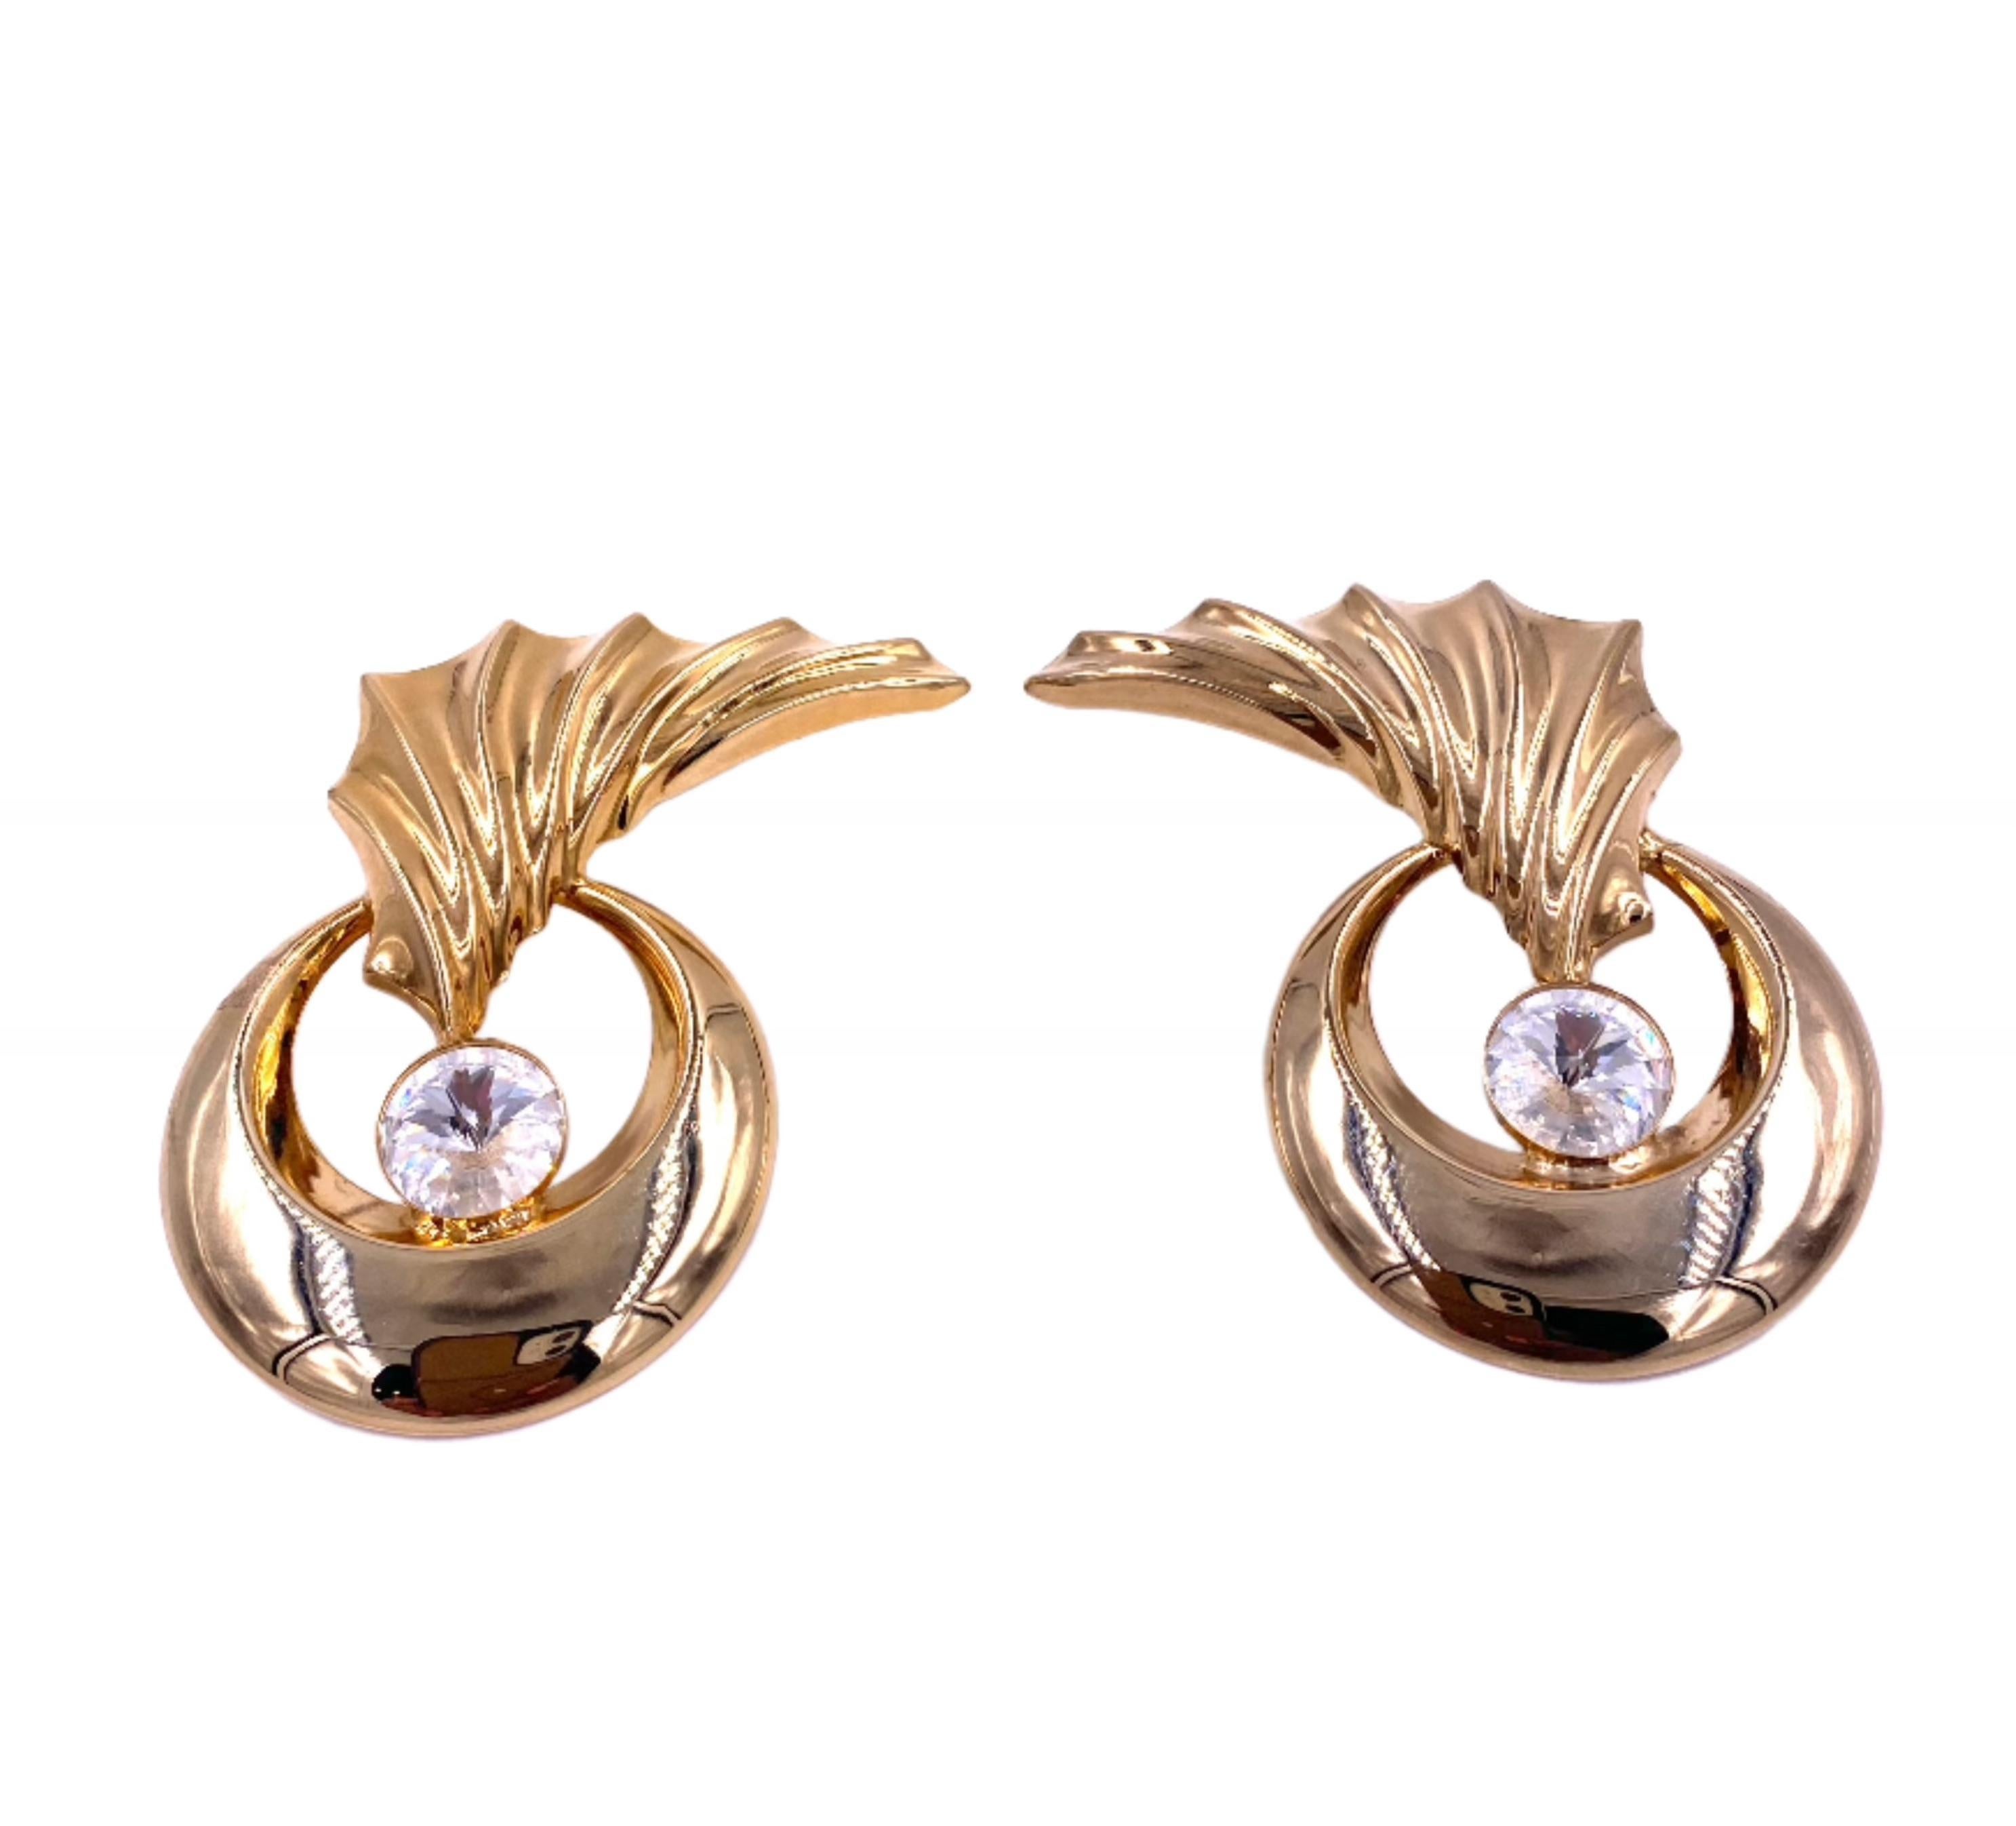 Transform any outfit into a captivating ensemble with our Vintage Gold Crystal Wing Climber Earrings. The intricate vintage gold wings add a touch of glamour, while the sparkling center crystal brings a touch of elegance. Elevate your look and turn